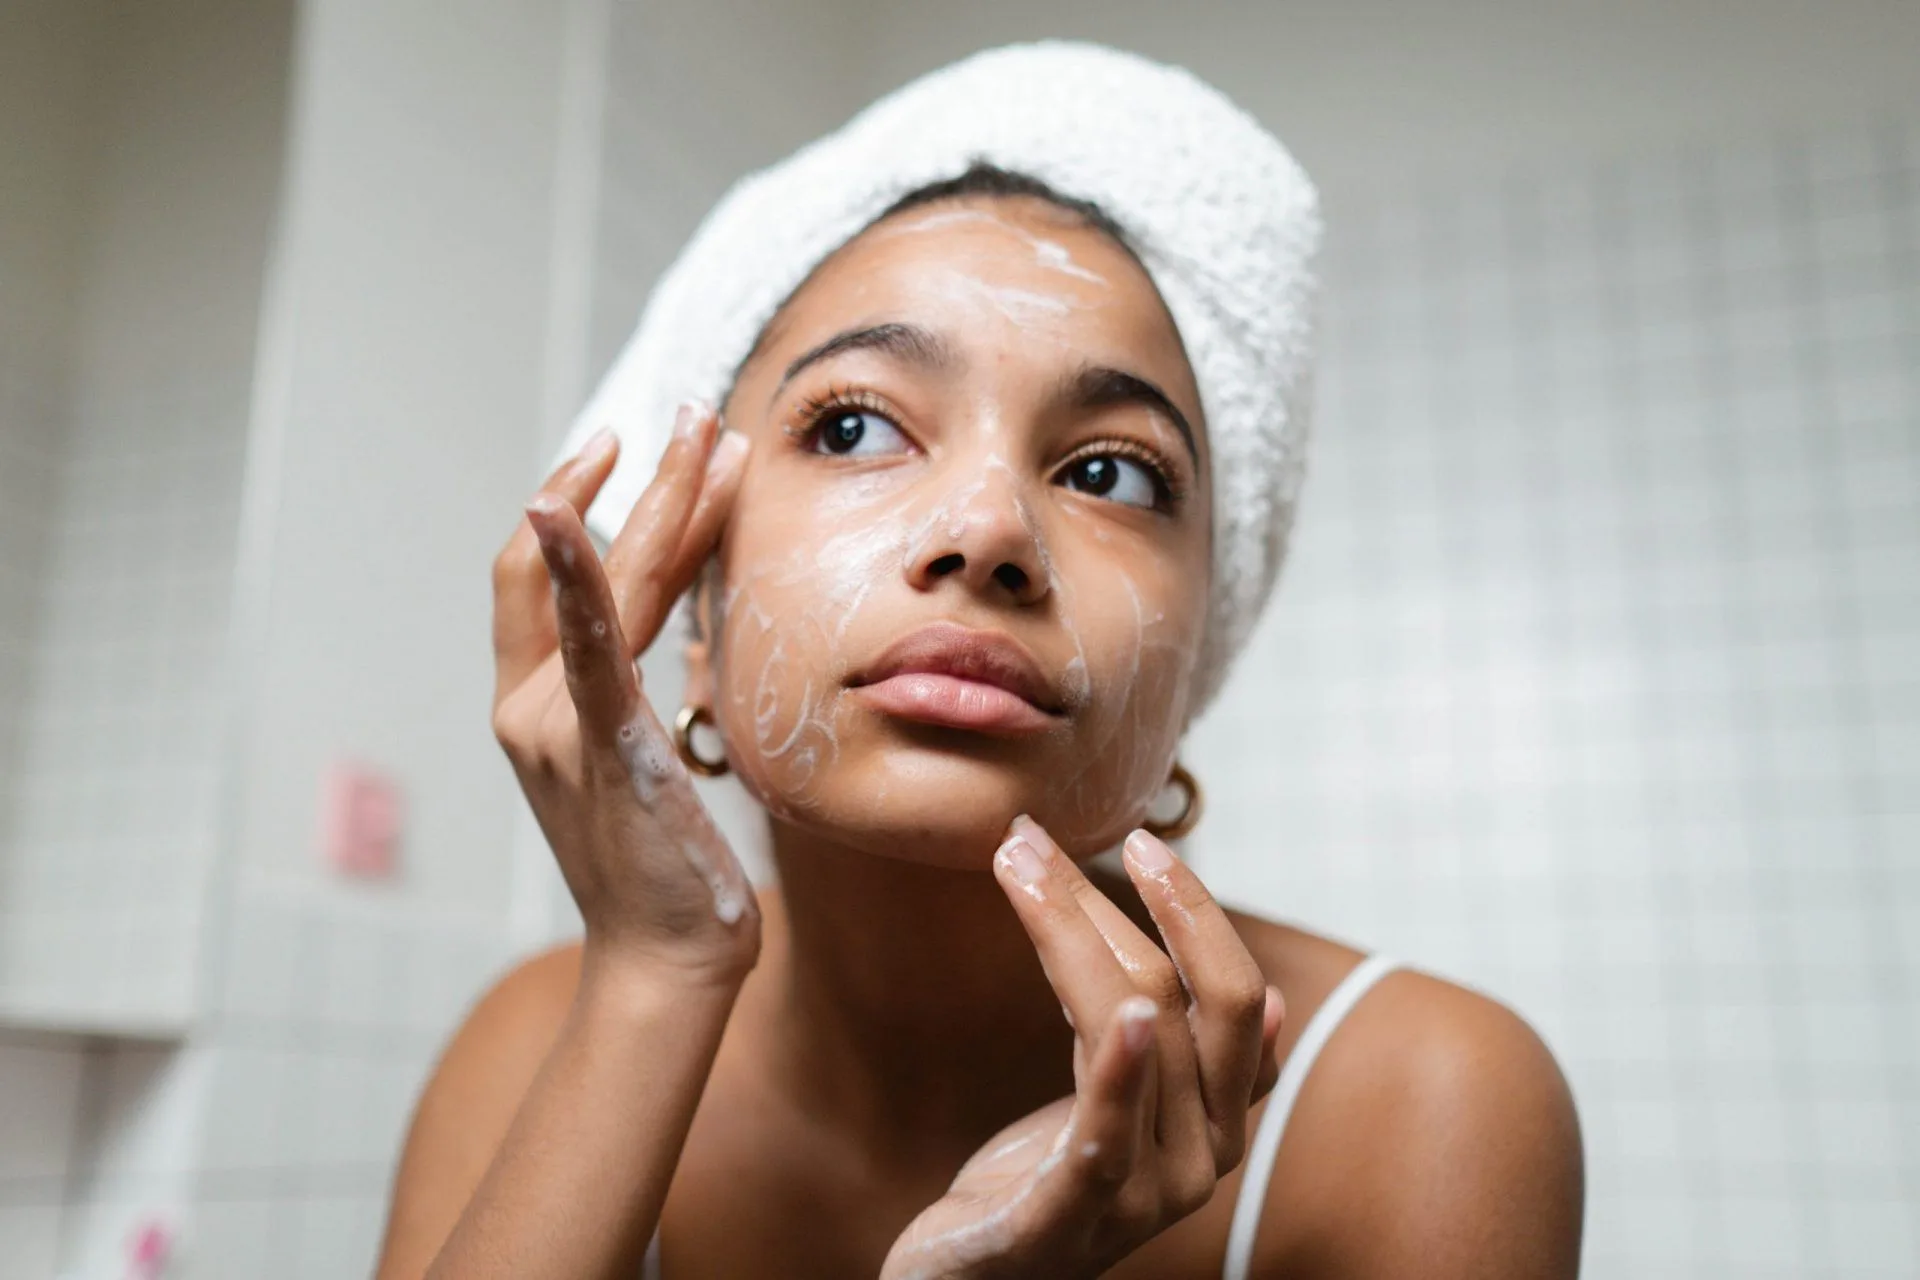 Is Your Skincare Routine Causing Irritation?